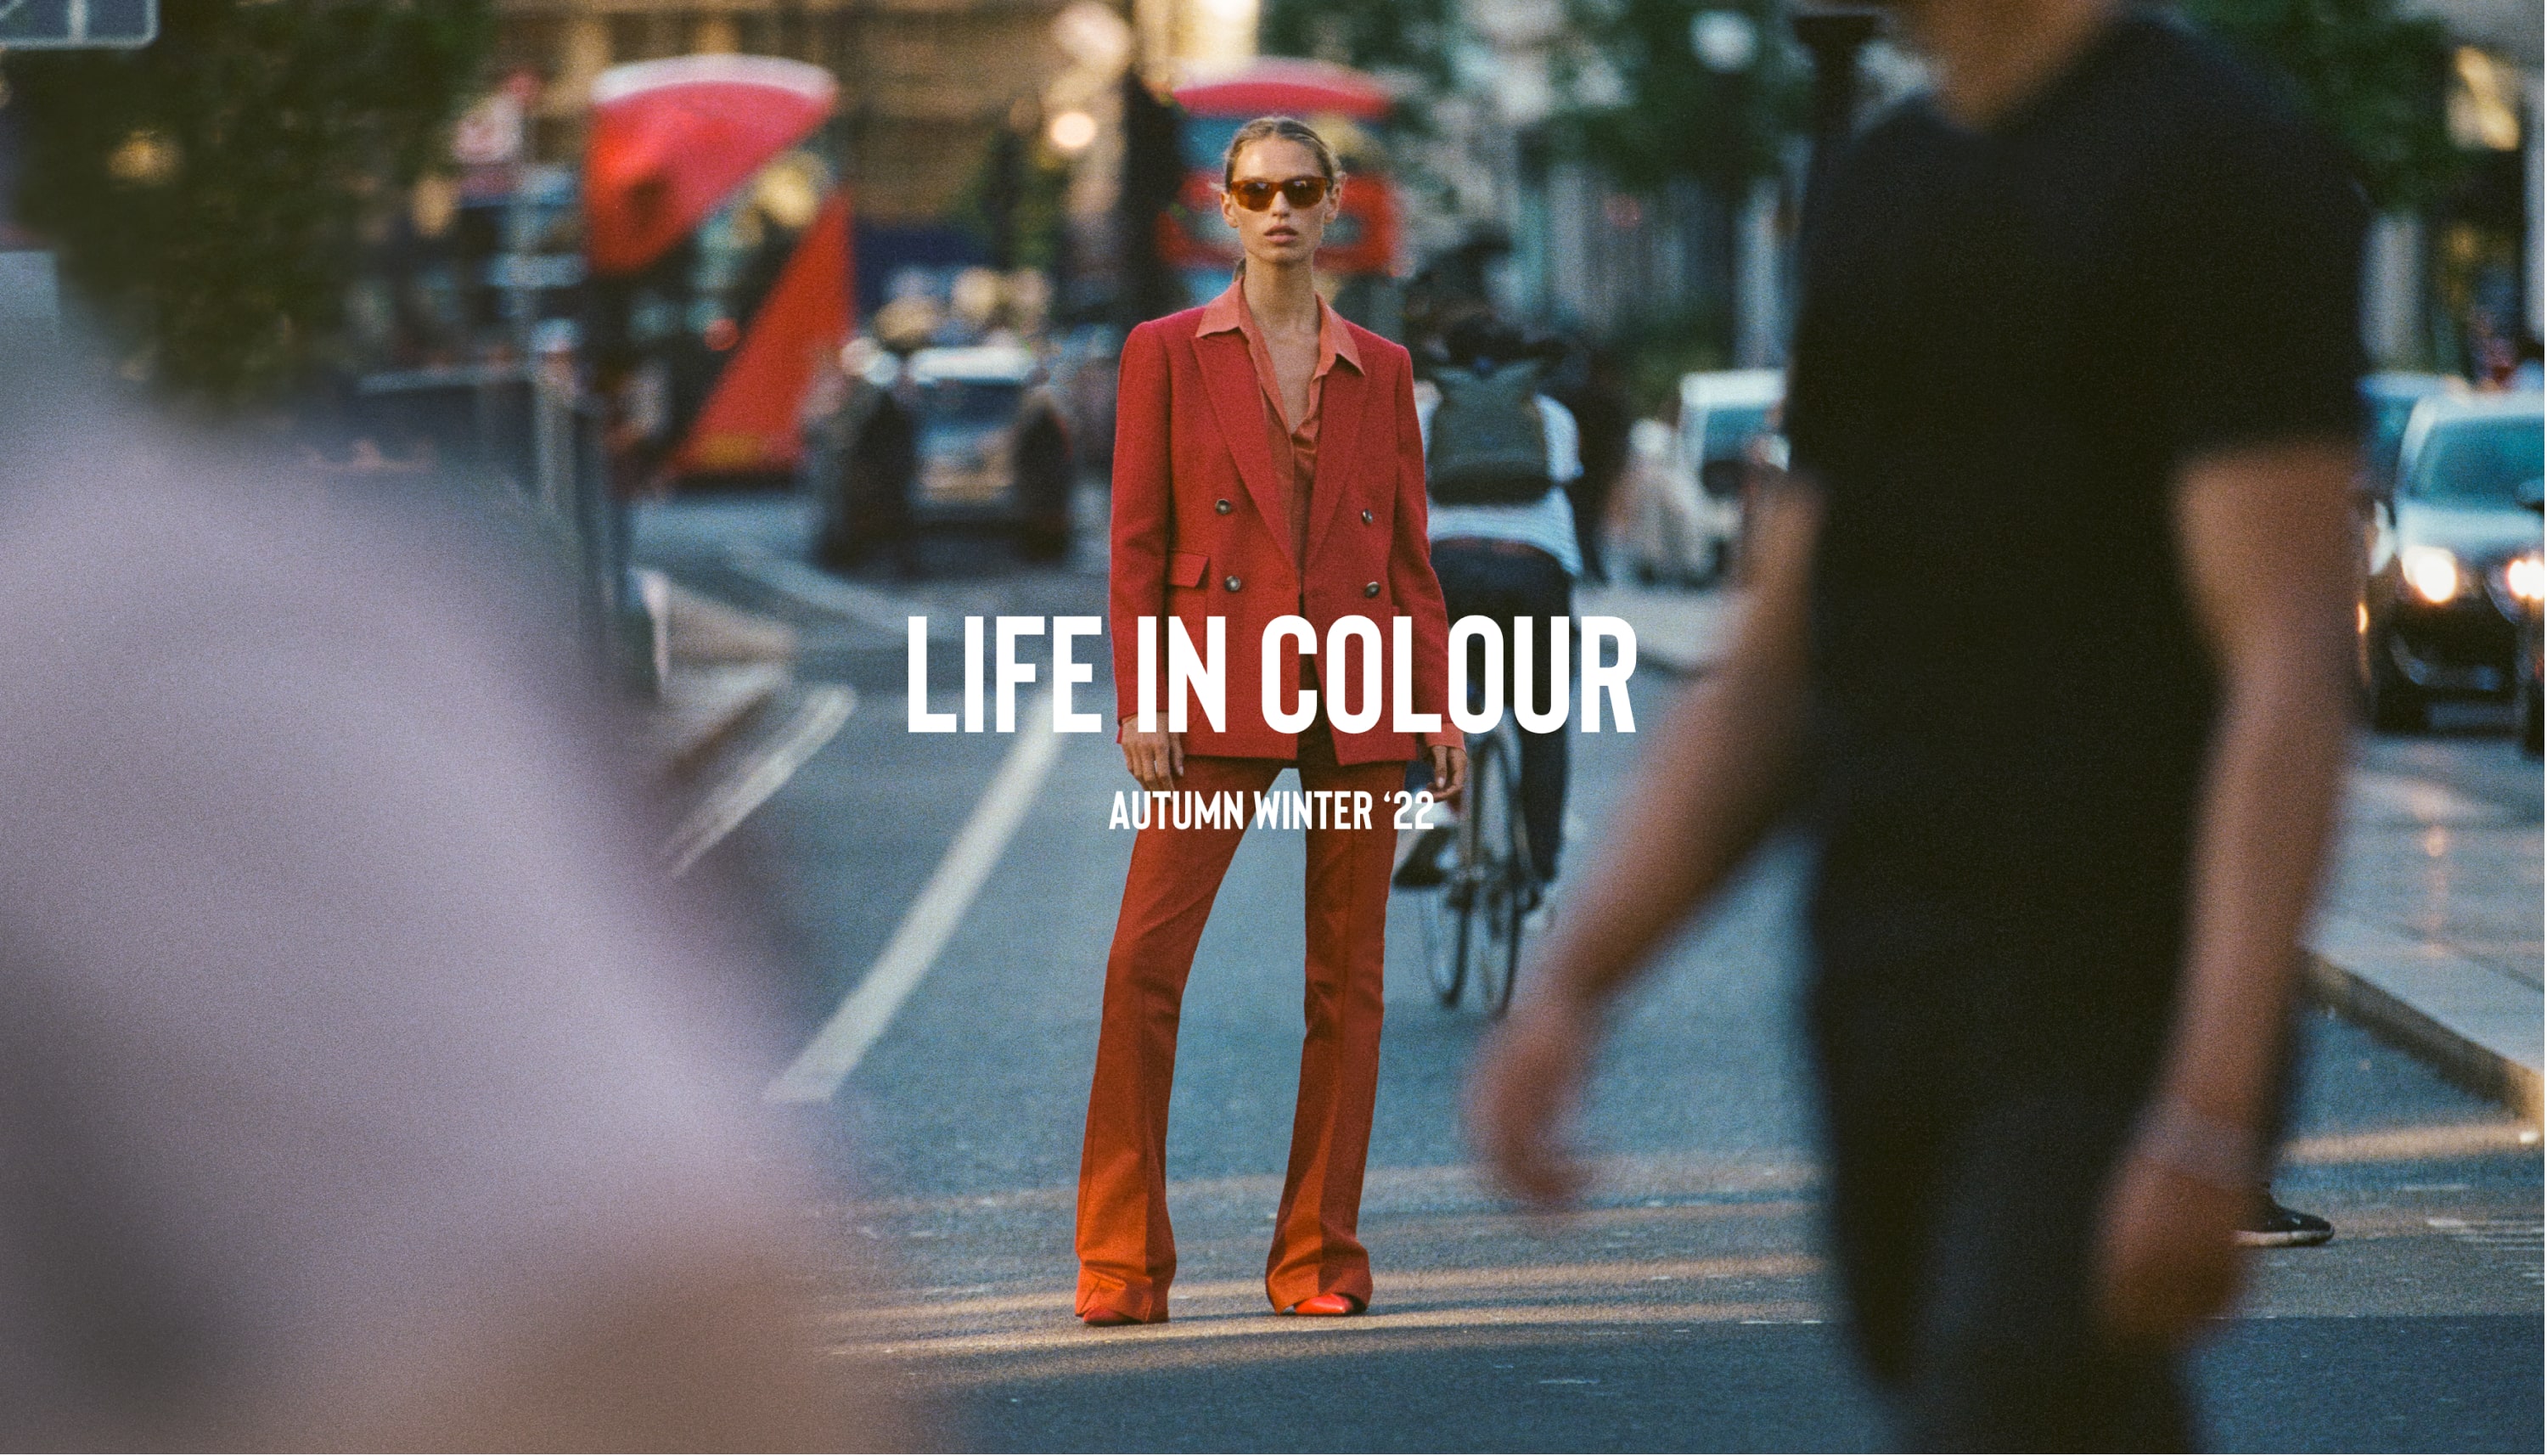 07.09.22 - Homepage - UK - Life In Colour-min